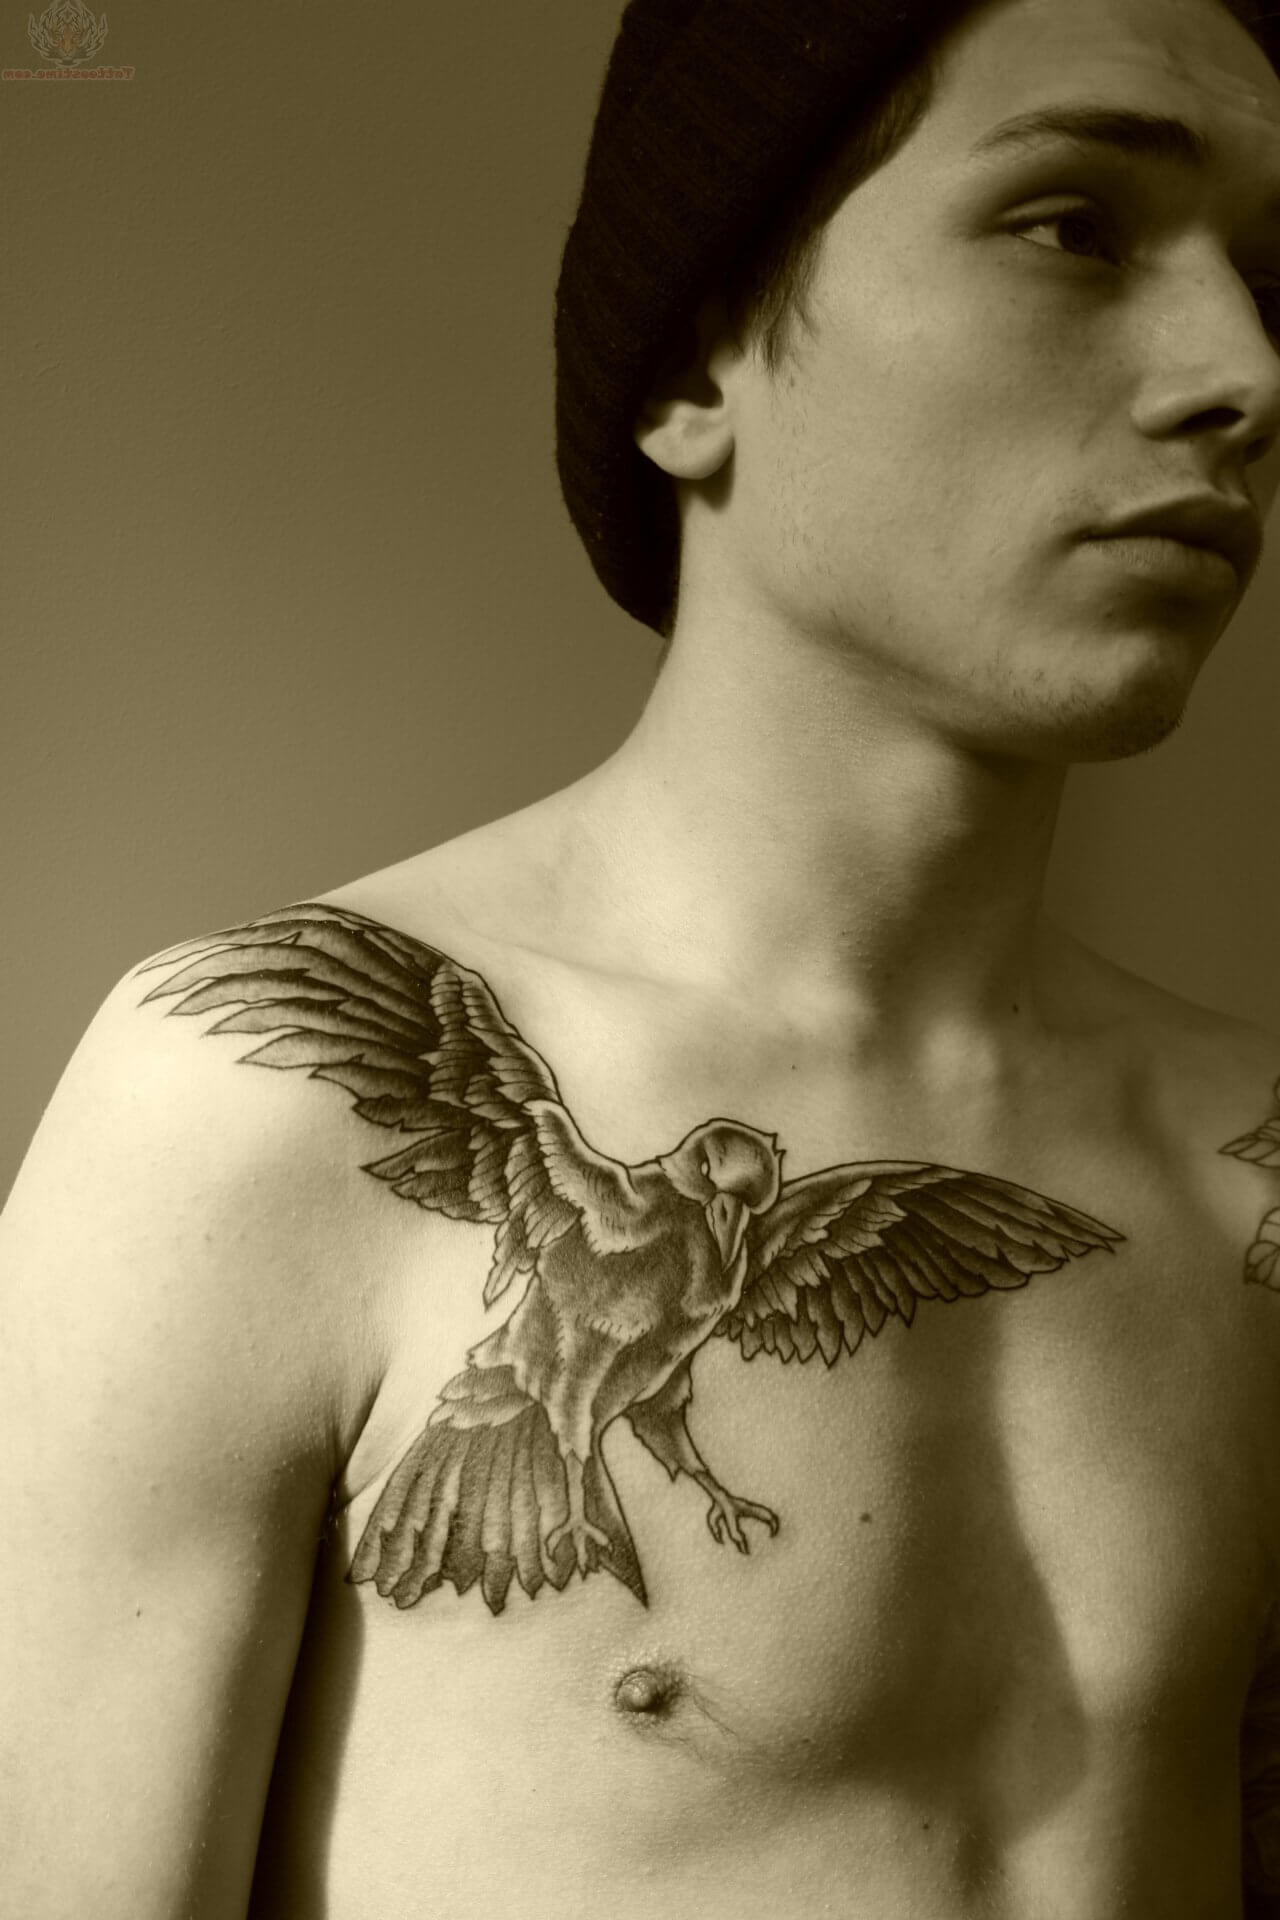 The 100 Best Chest Tattoos For Men Improb with regard to dimensions 1280 X 1920